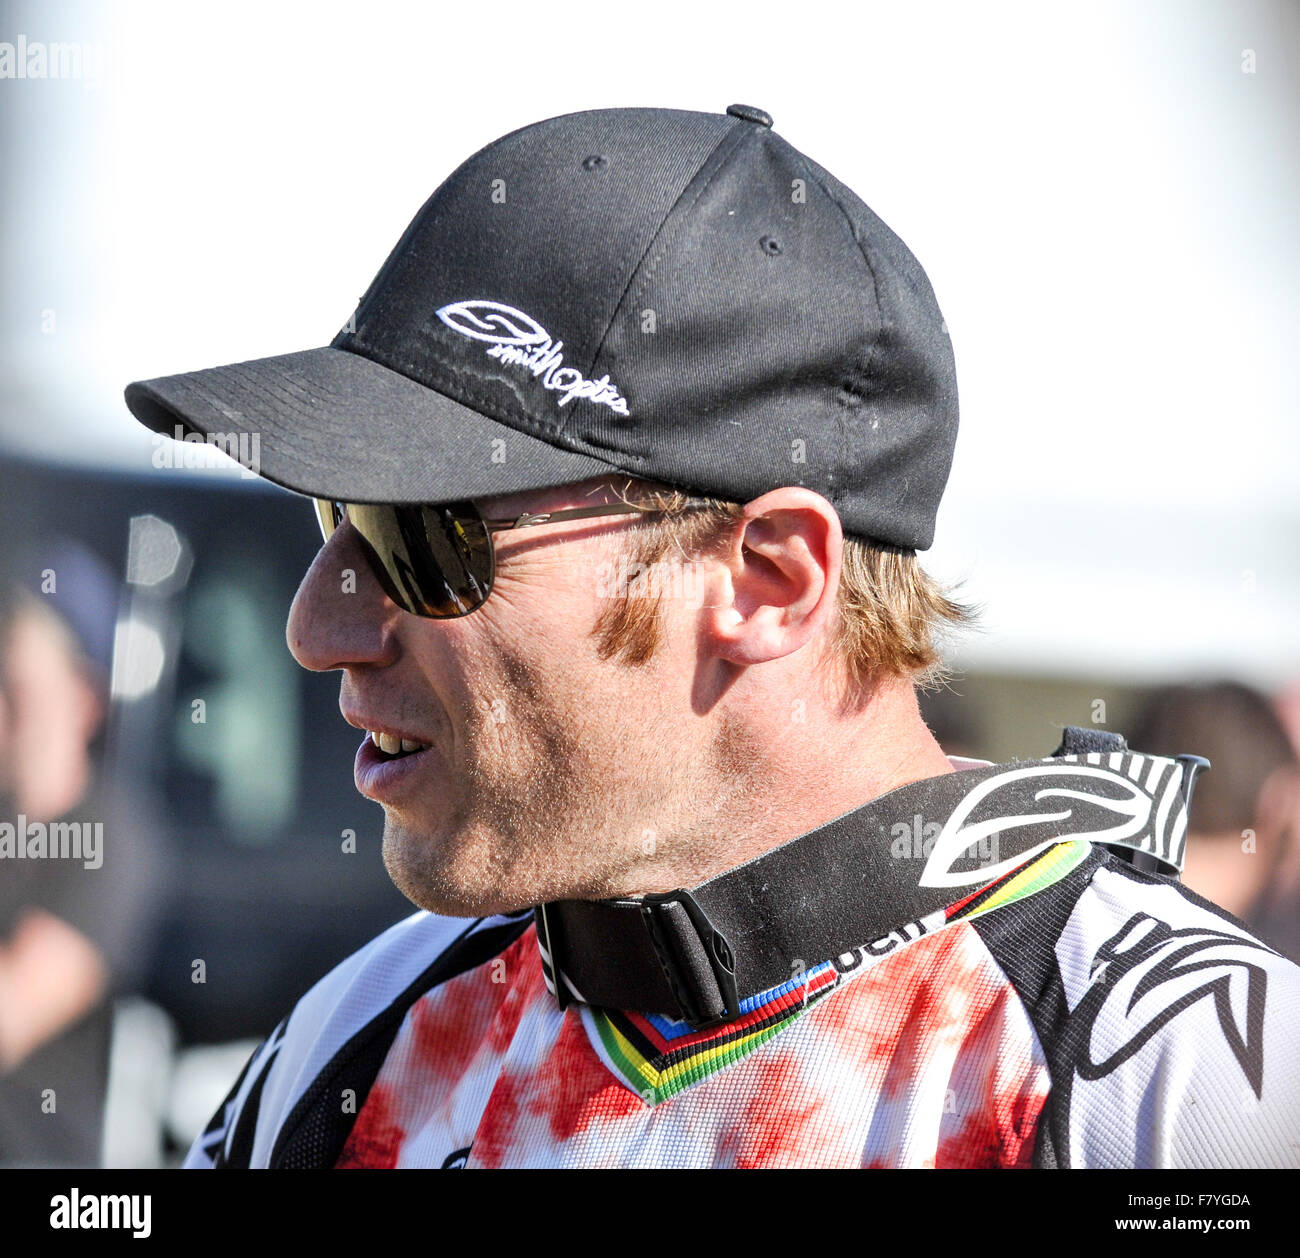 Preview - steve-peat-downhill-mountain-bike-racer-world-cup-england-uk-F7YGDA